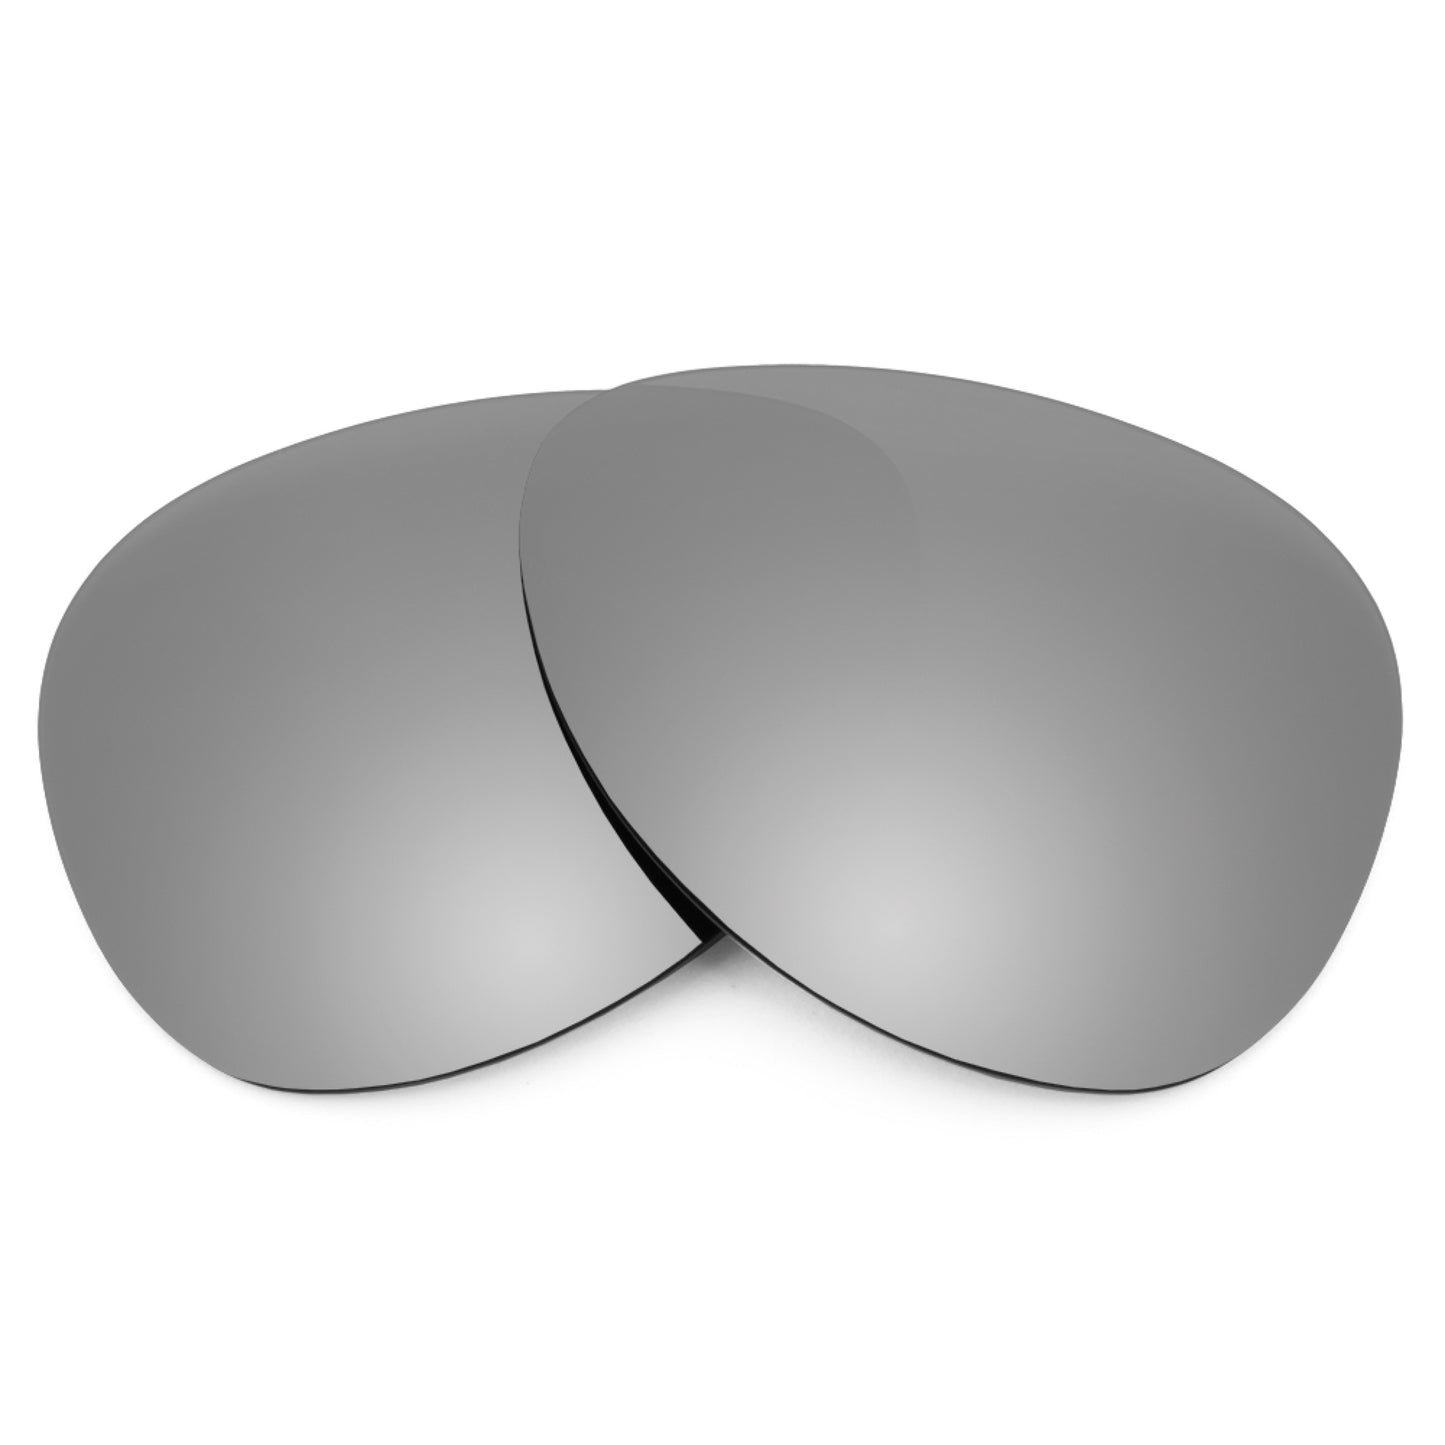 Revant replacement lenses for Ray-Ban RB4147 60mm Non-Polarized Titanium